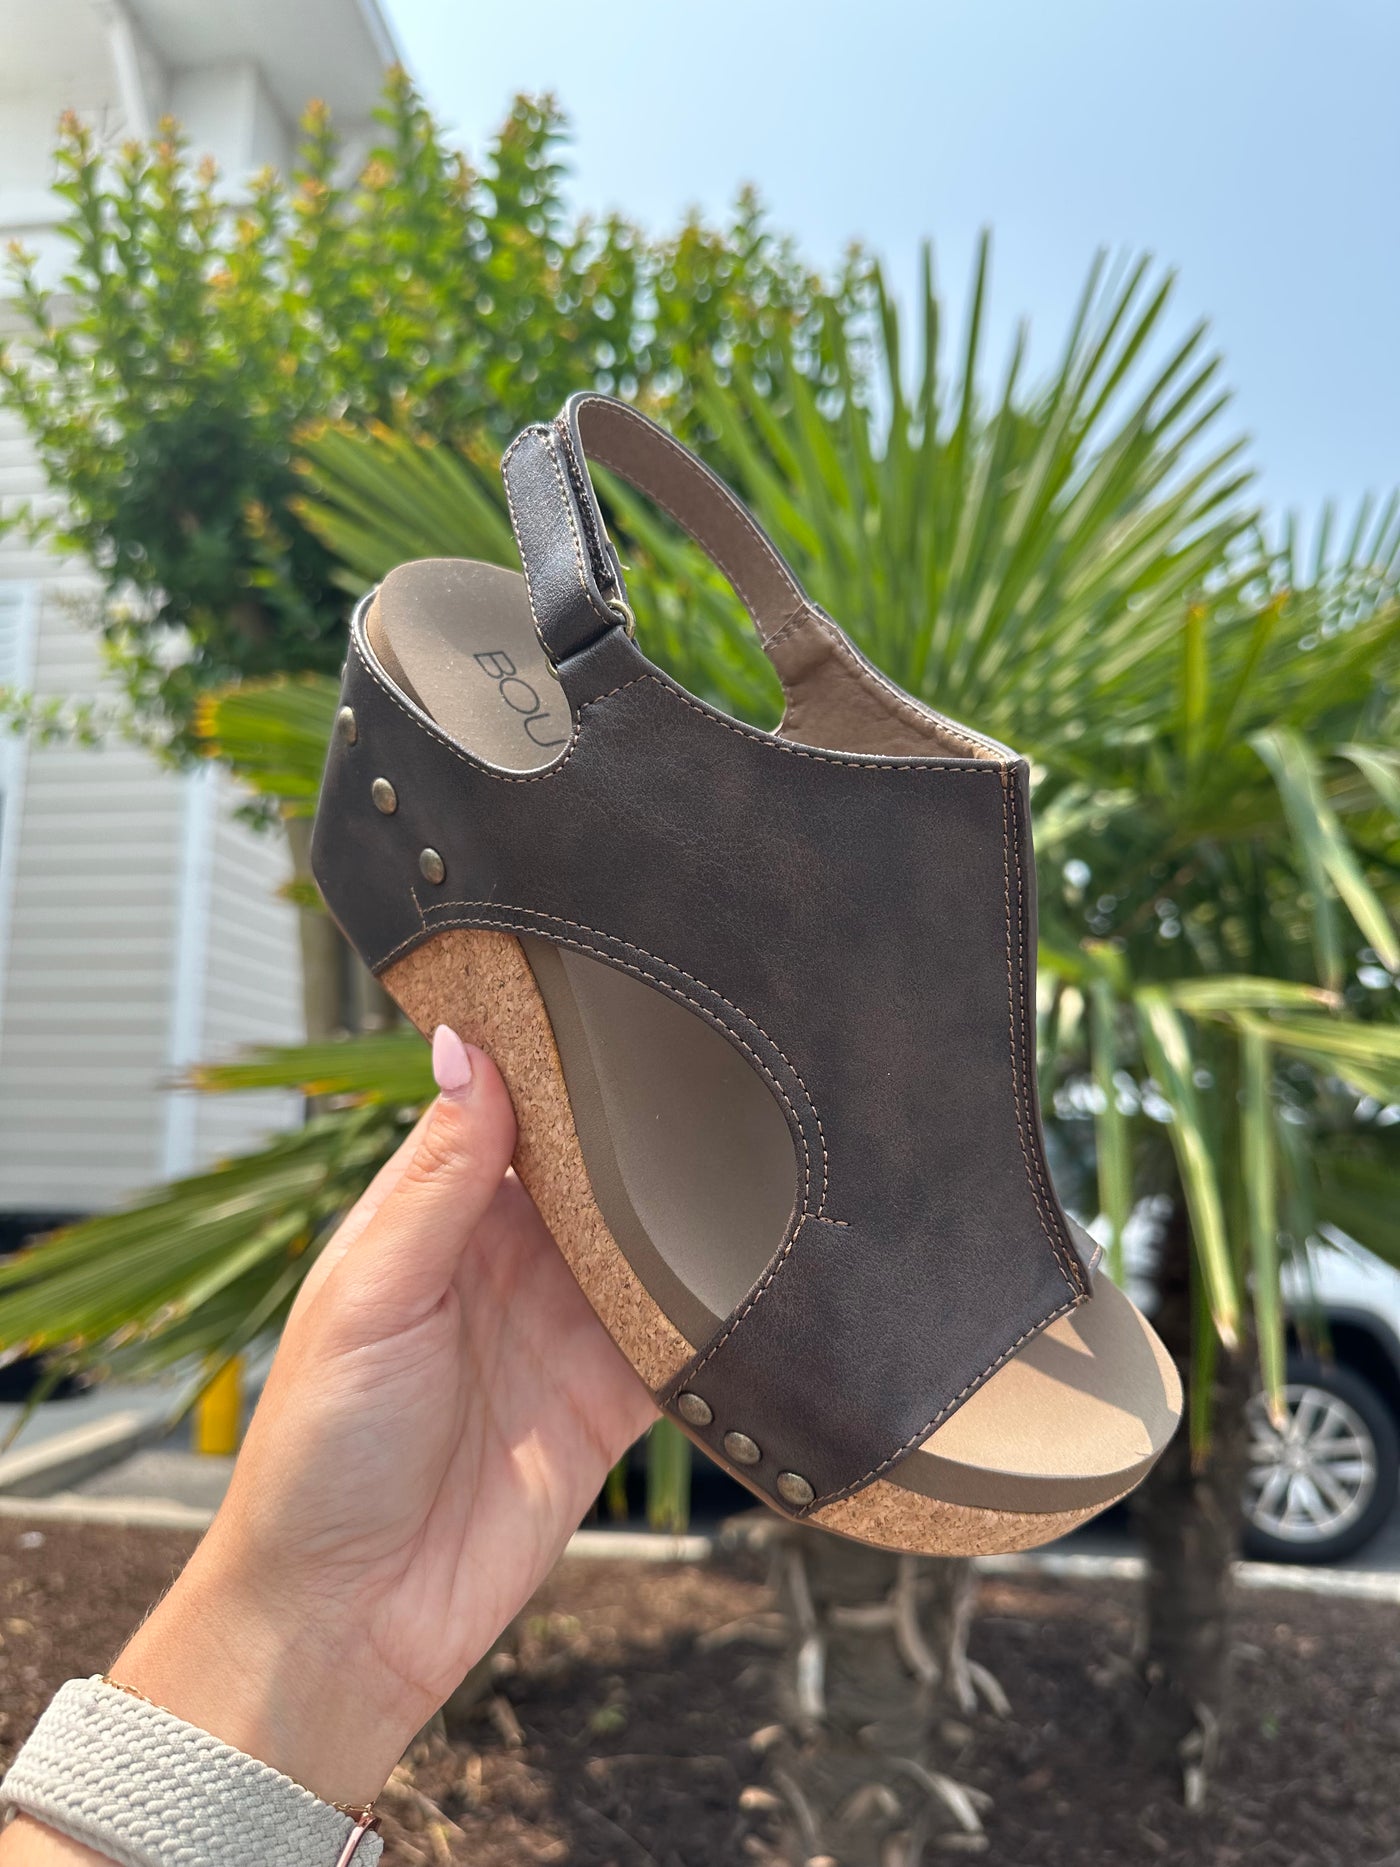 Corky's Carley Wedge Sandals Chocolate Smooth